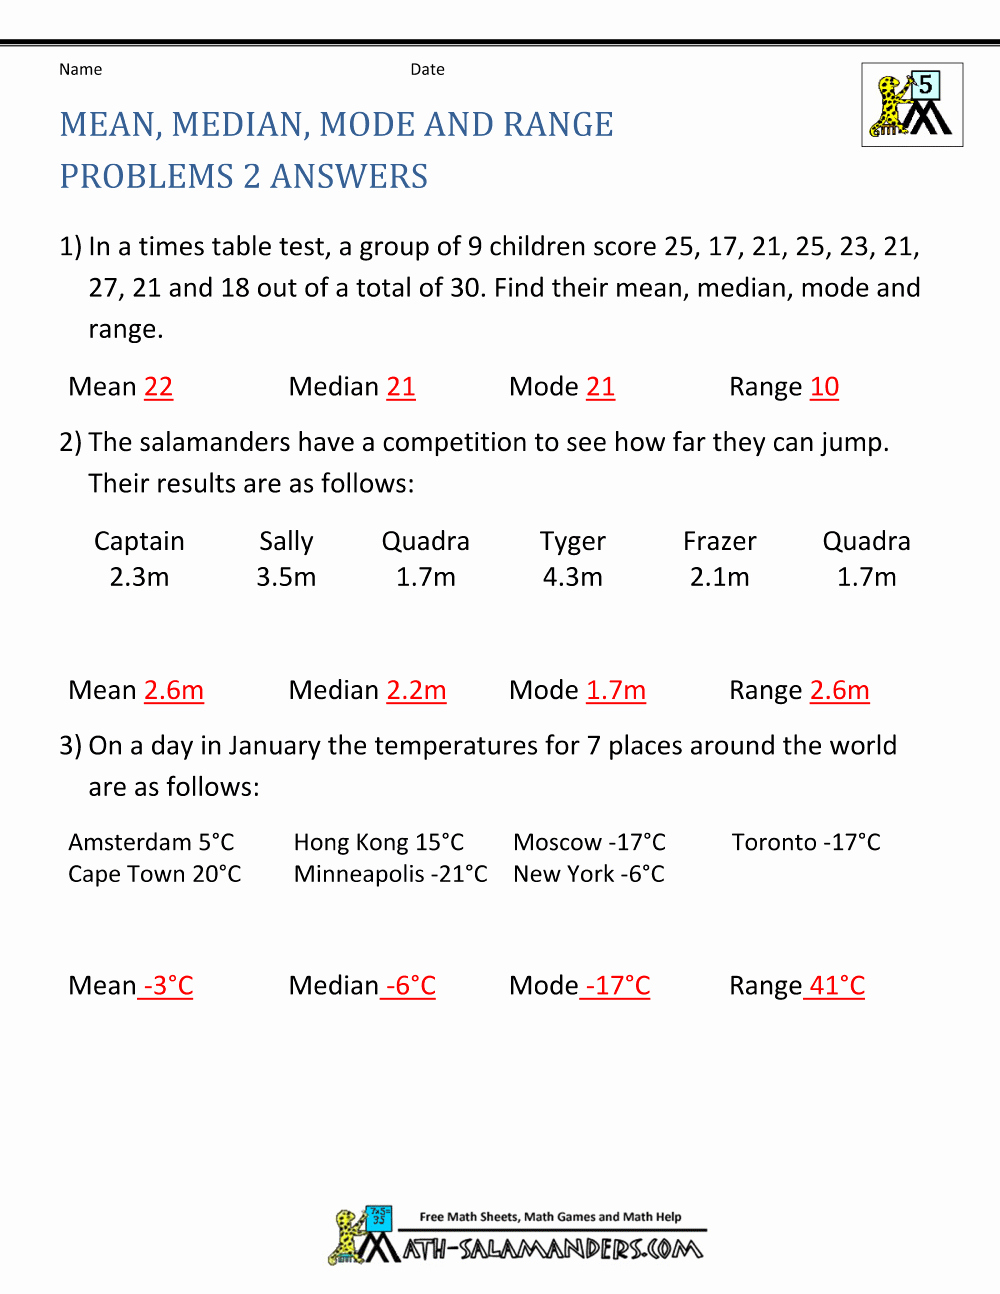 Standard Deviation Worksheet with Answers Awesome Mean Mode Median and Range Worksheet Answers Math